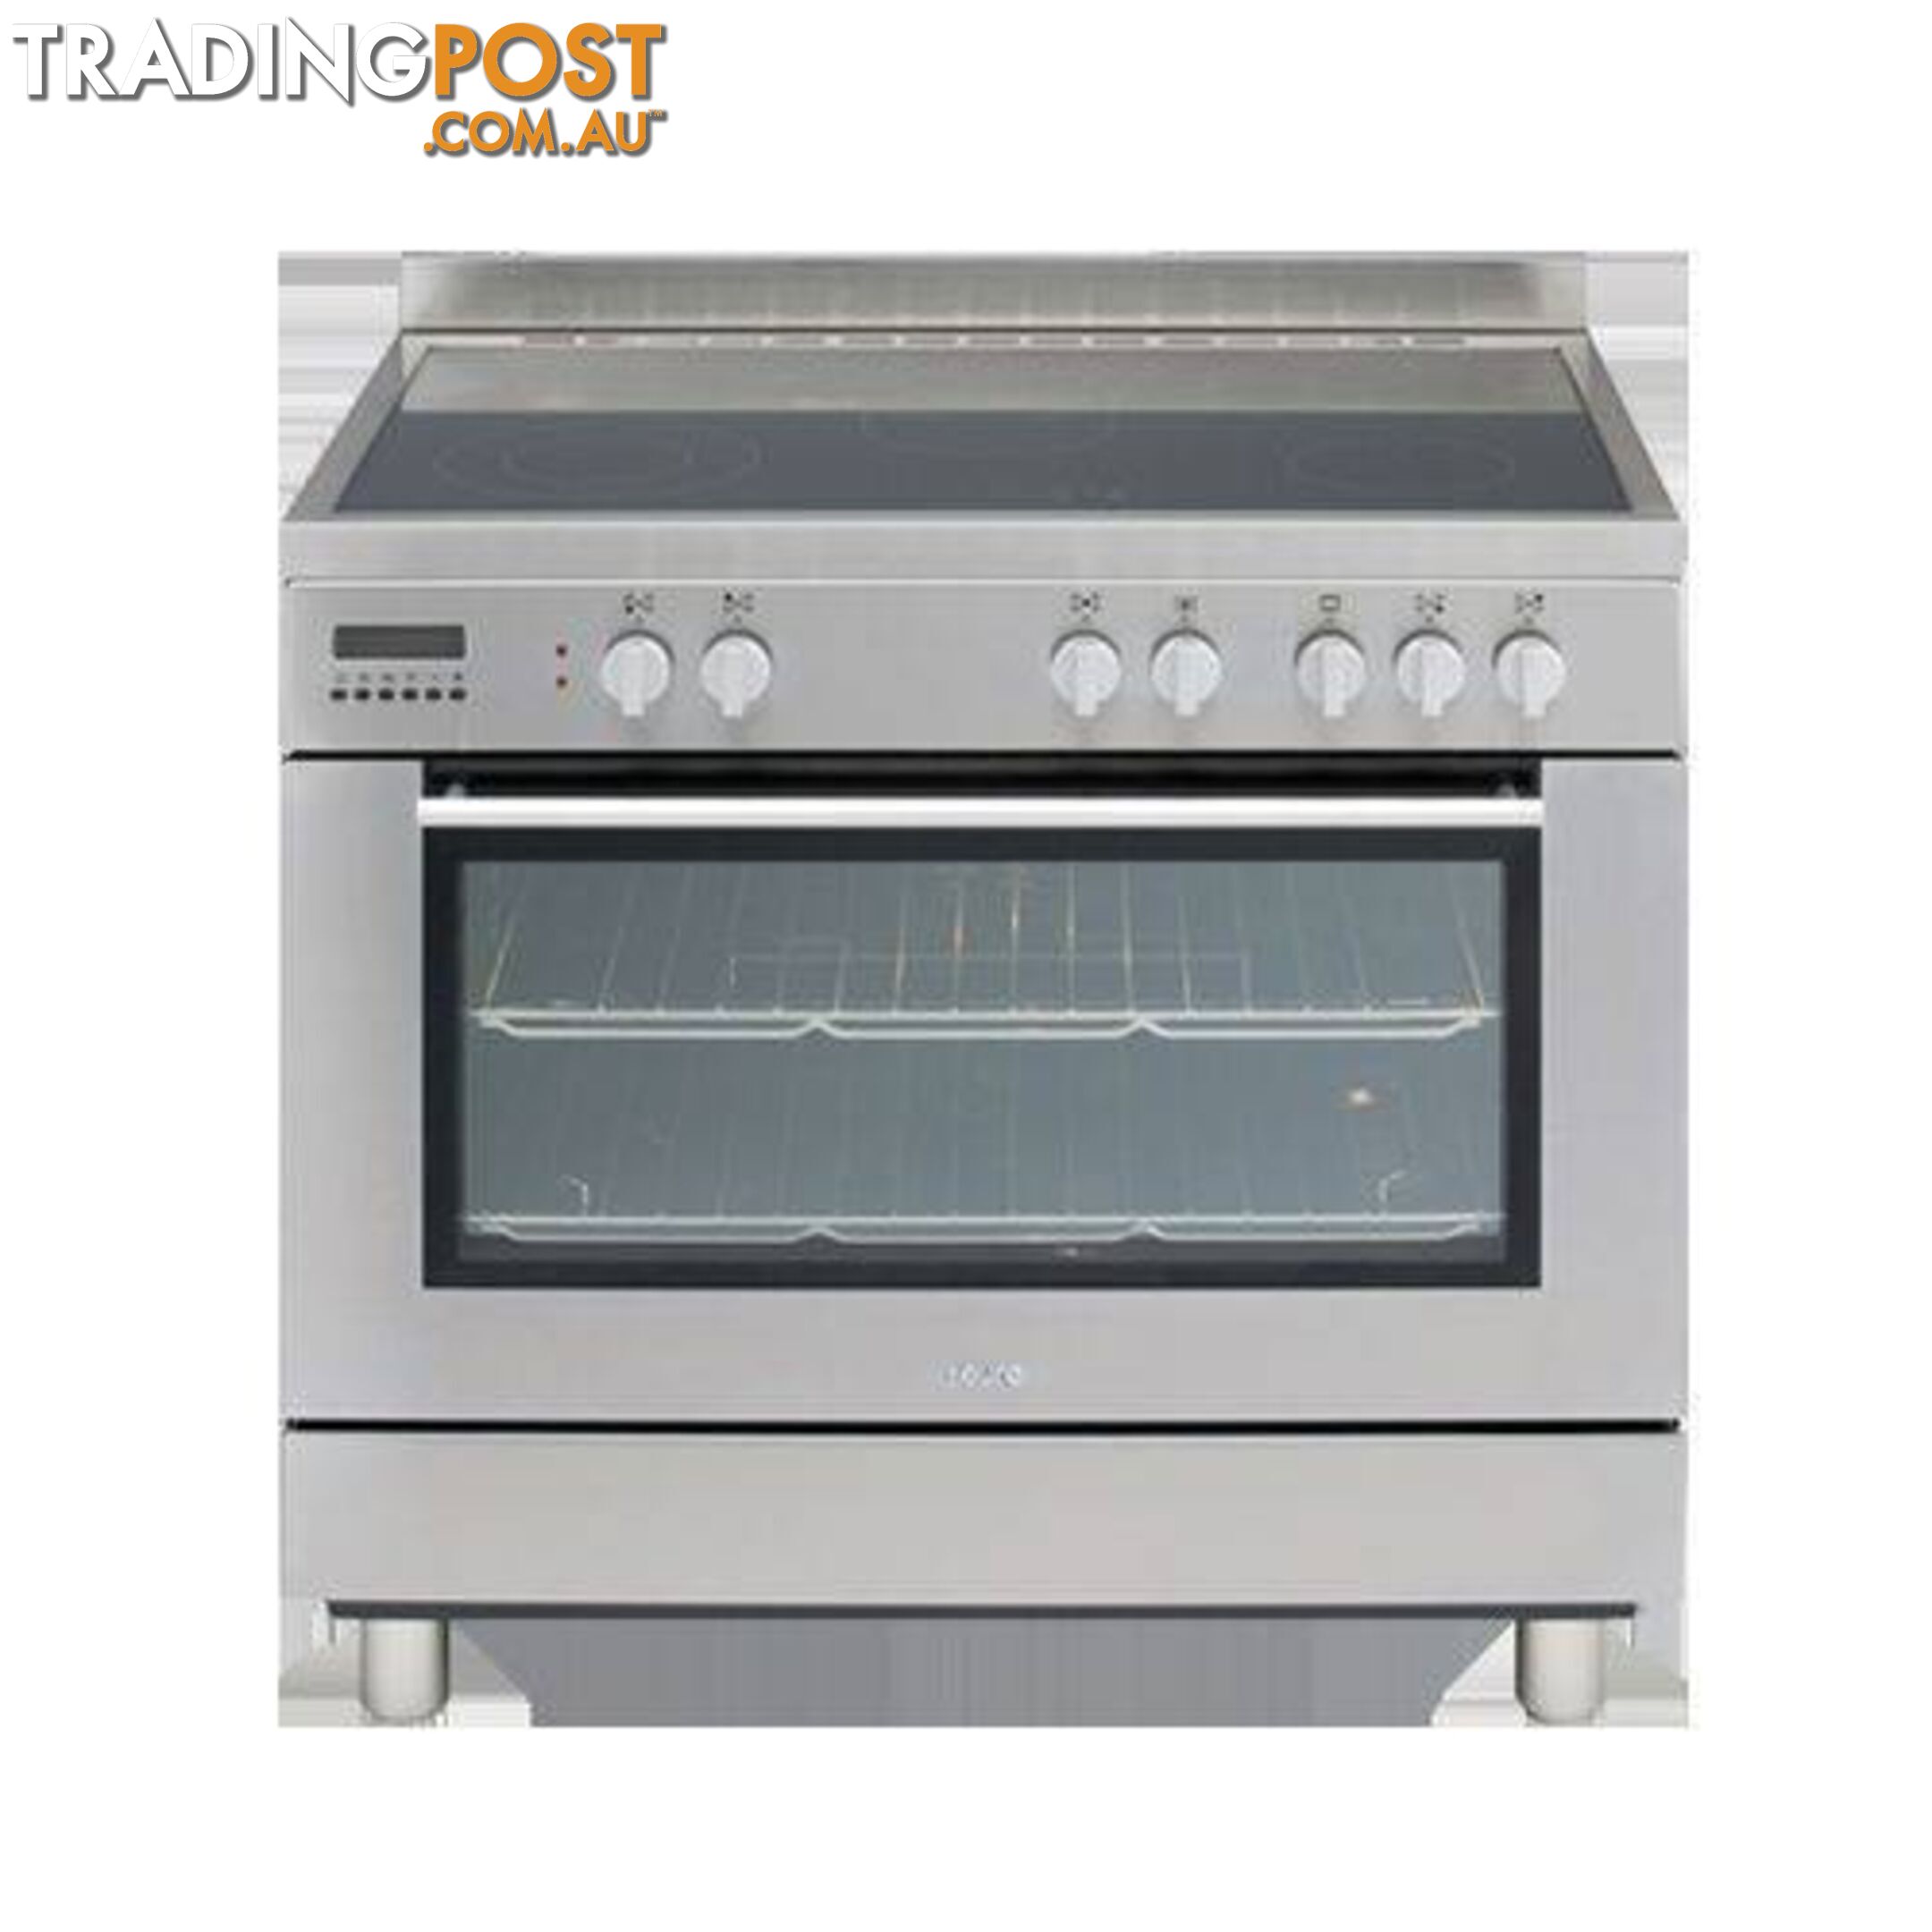 Euro 90cm Stainless Ceramic Cooktop Freestanding Oven - EE900GSXS